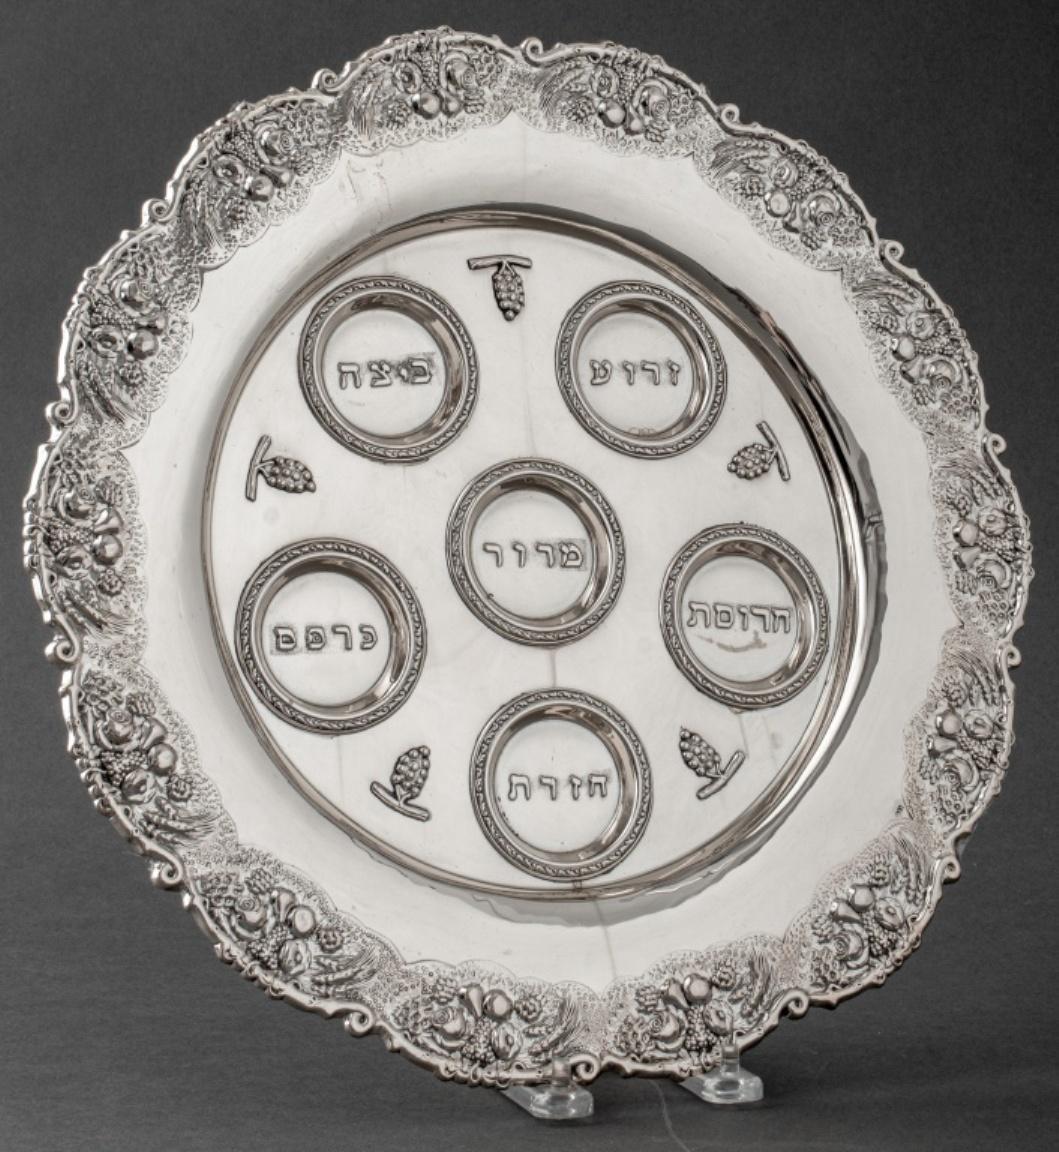 European Judaica silver seder plate with scalloped edges and with rim cast and chased in high relief, the cavetto with the traditional recesses with Hebrew inscriptions and stamped 